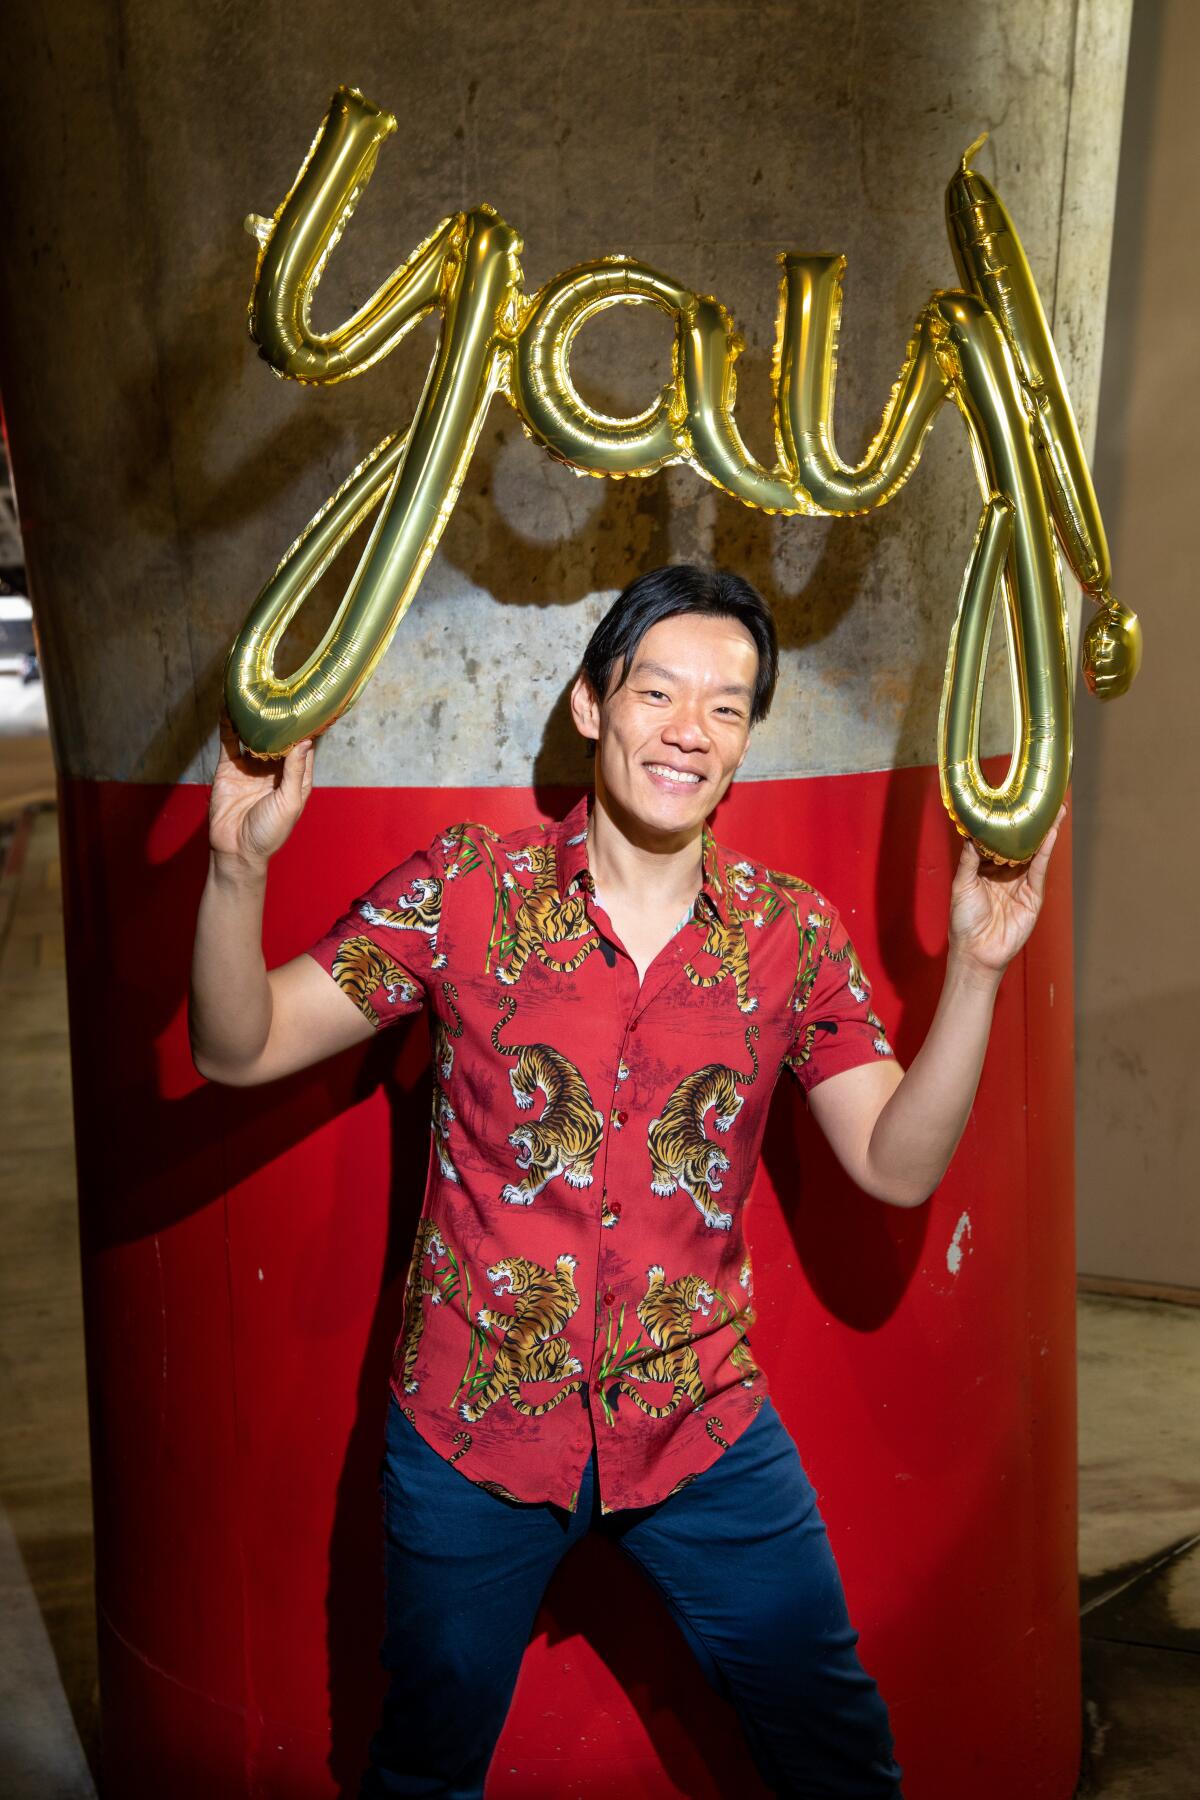 Man with red shirt holding  balloon spelling the word "Yay"